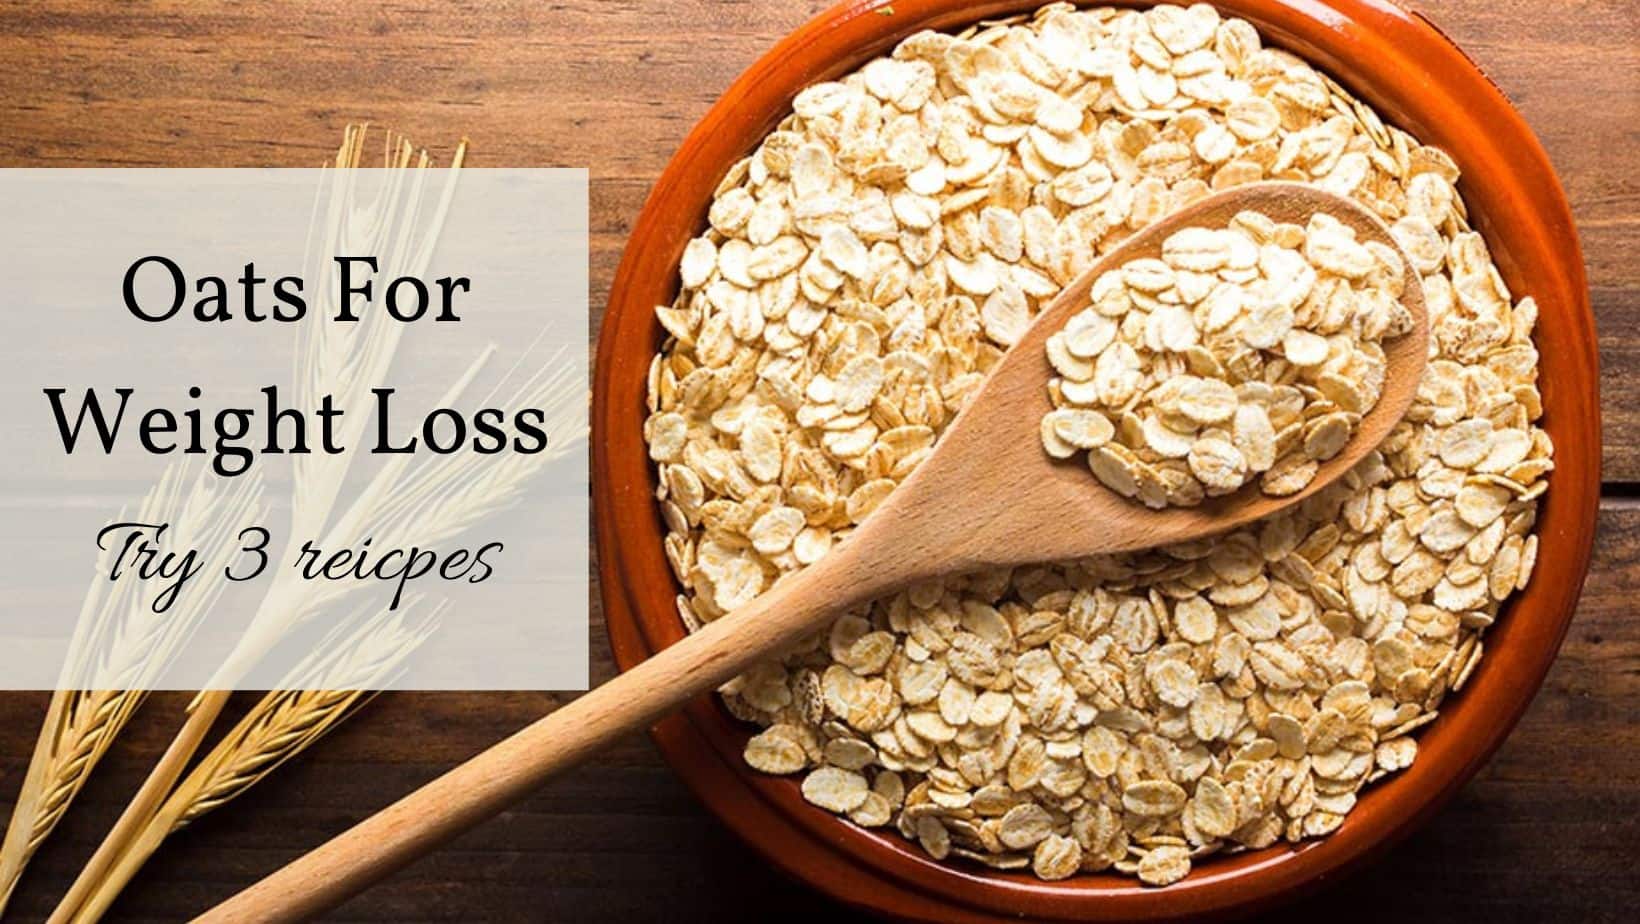 Oats For Weight Loss: 3 Healthy Oats Recipes That Can Help You Lose ...